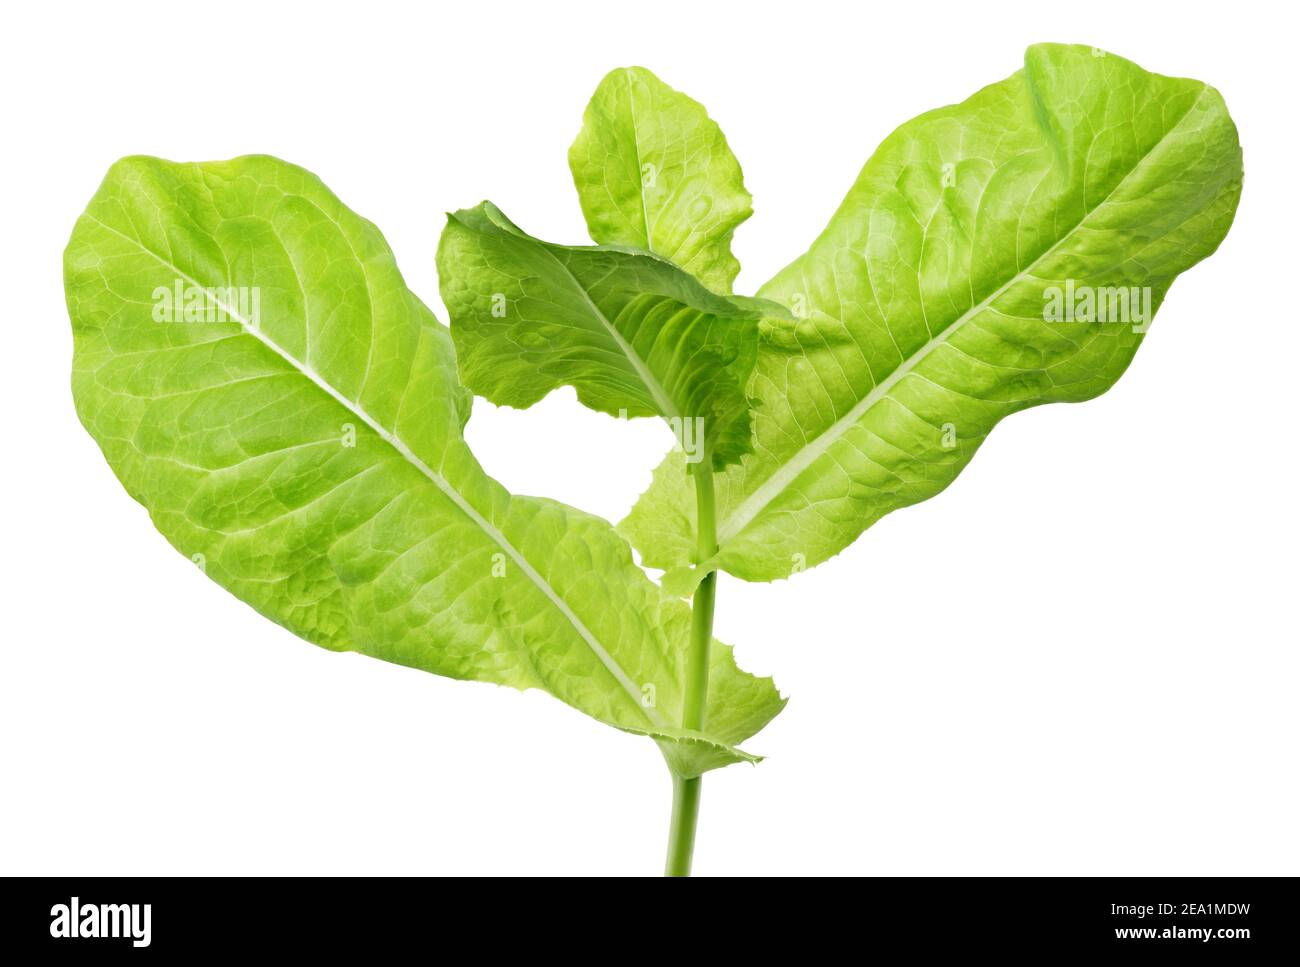 branch of lettuce green leaf salad isolated on white background with clipping path Stock Photo